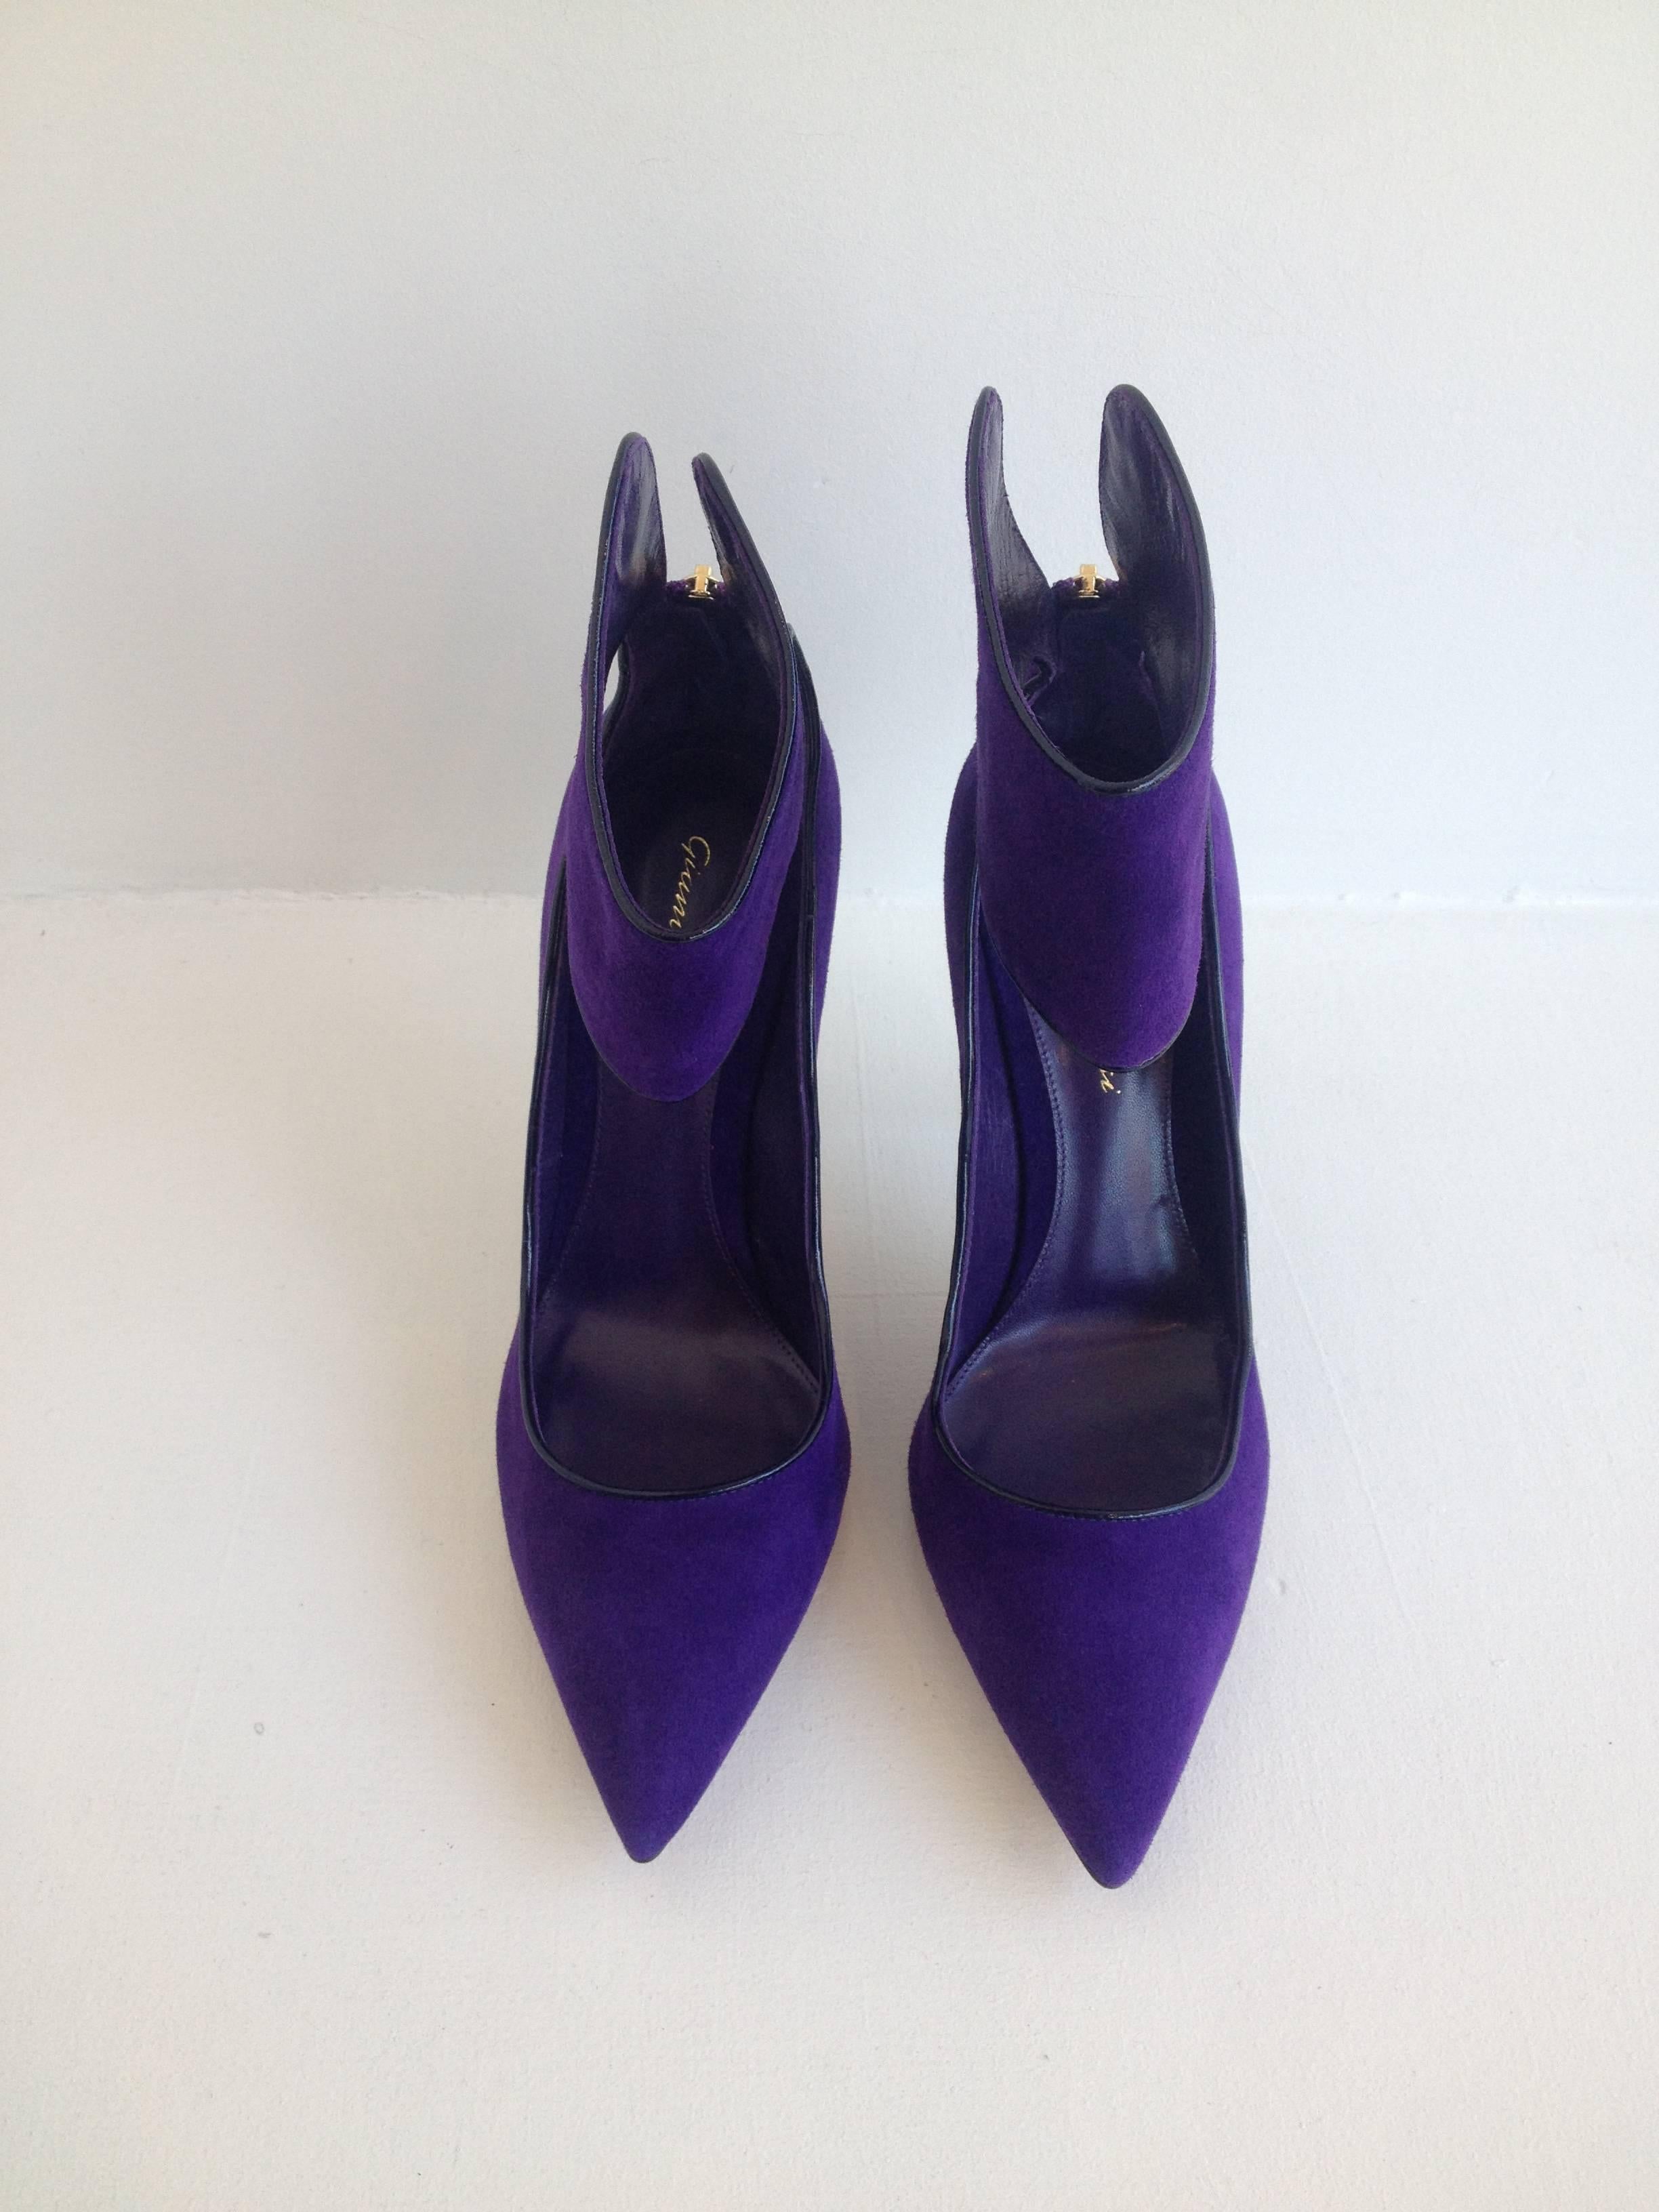 Vibrant and vivid purple suede is sure to turn heads. These heels feature a sleek pointed toe and a 4 inch stiletto heel for a classic silhouette, but a wide ankle cuff adds a very modern edge. The edges are lined with black piping and the gold